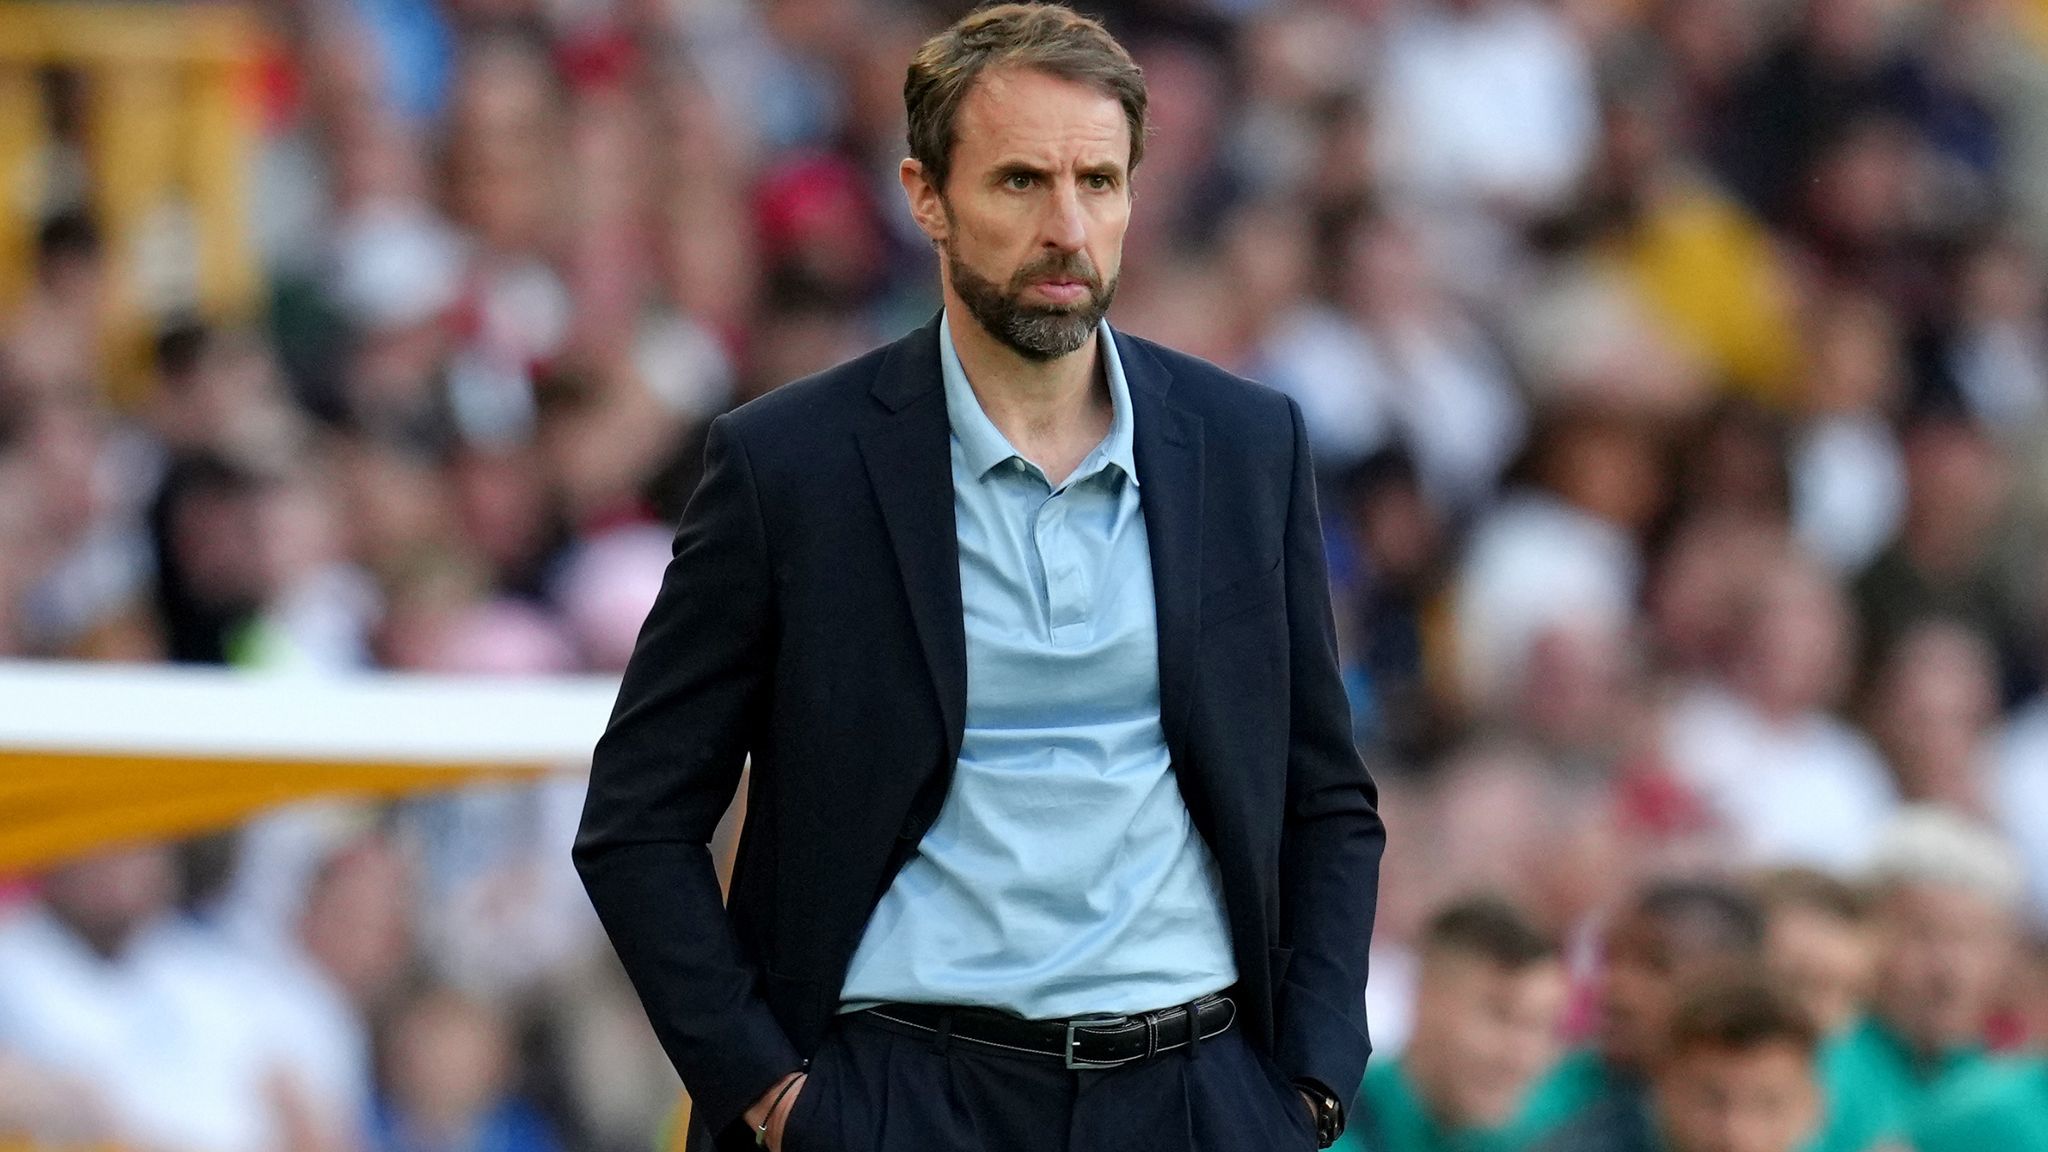 England coach Southgate dissatisfied with his team's performance against Iran